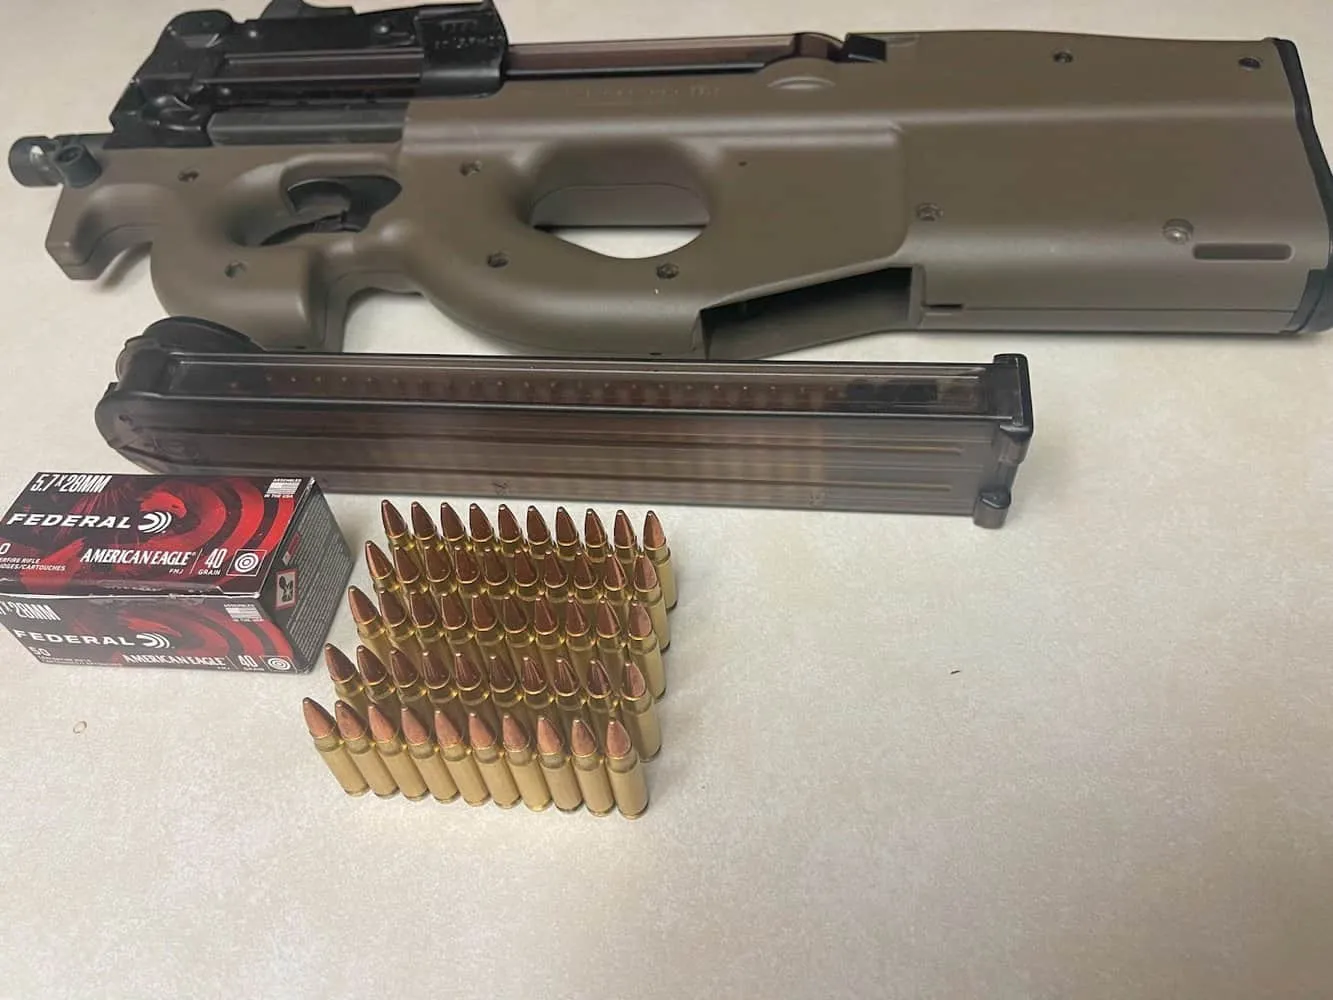 fn ps90 with magazines and ammo